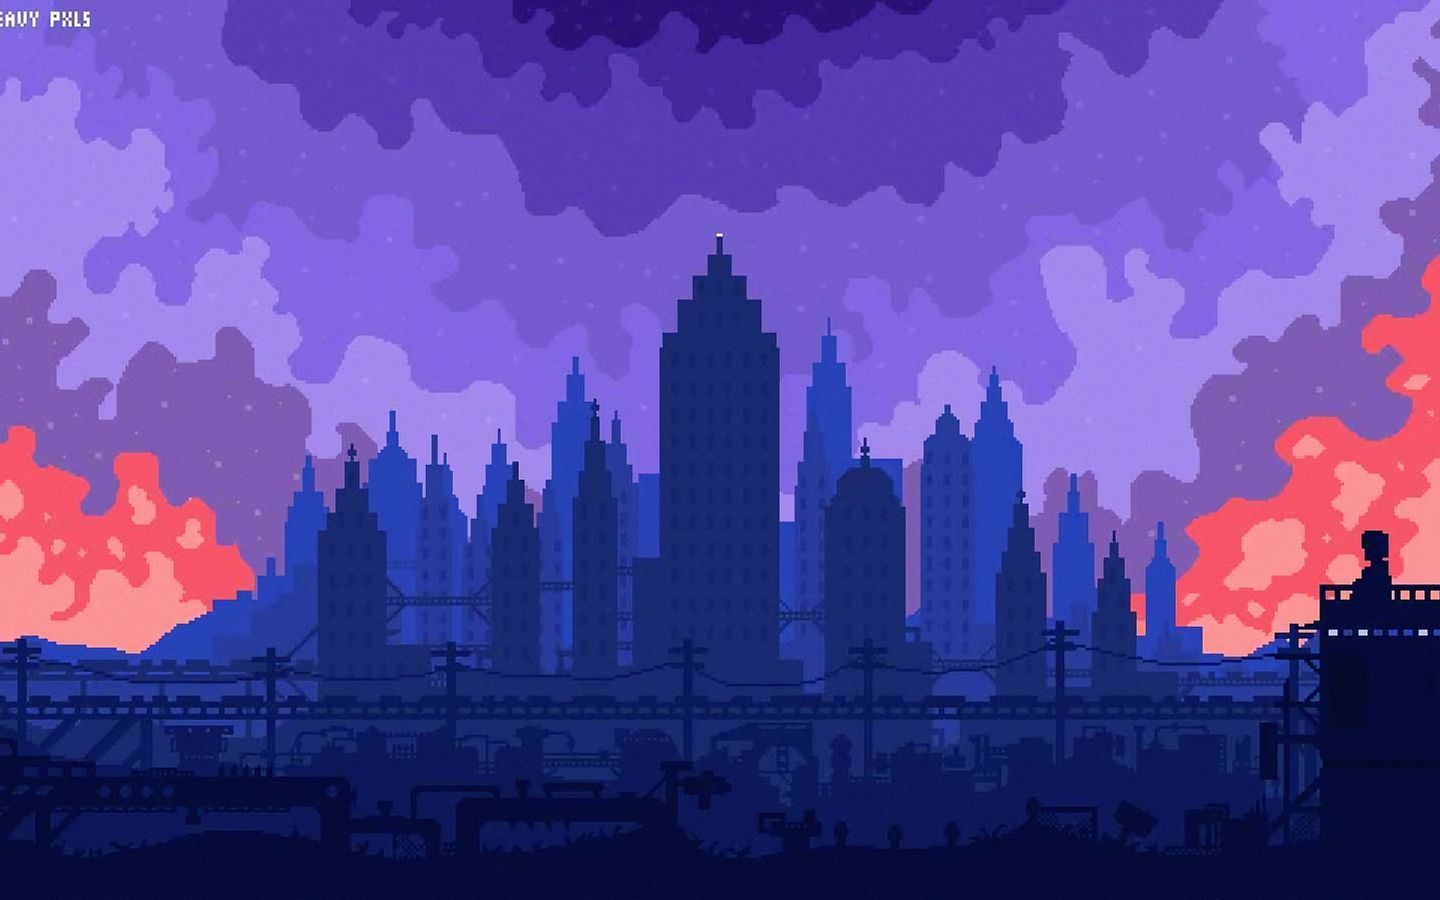 A pixelated city skyline at dusk with purple and pink clouds in the sky. - 1440x900